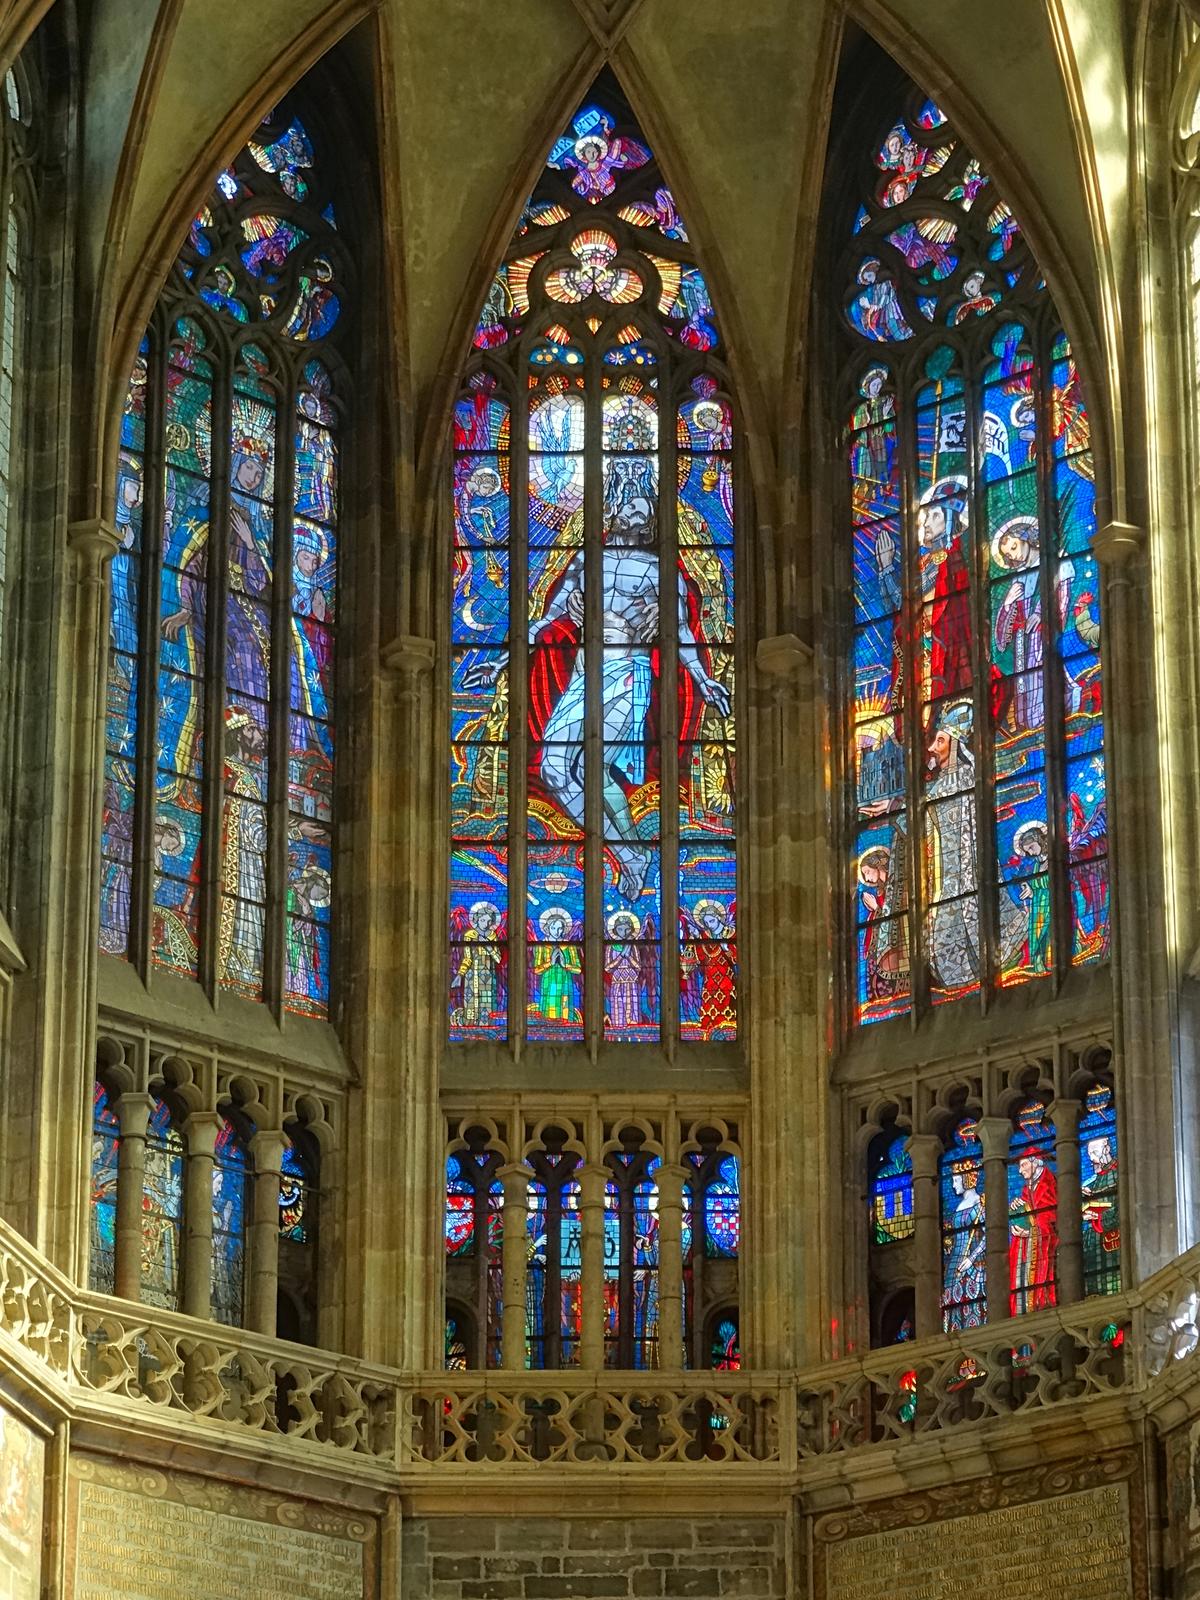 In this triptych, the stained glass windows with angled sides appear on the south side of the cathedral. Their glowing quality creates a sense of awe. In the center, Jesus is held in the hands of the Creator, and above a white dove appears, symbolic of the Holy Trinity. On the left, we see the Virgin Mary and, on the right, St. Wenceslas and St. Vitus on their knees. (ErwinMeier/CC BY-SA 4.0)